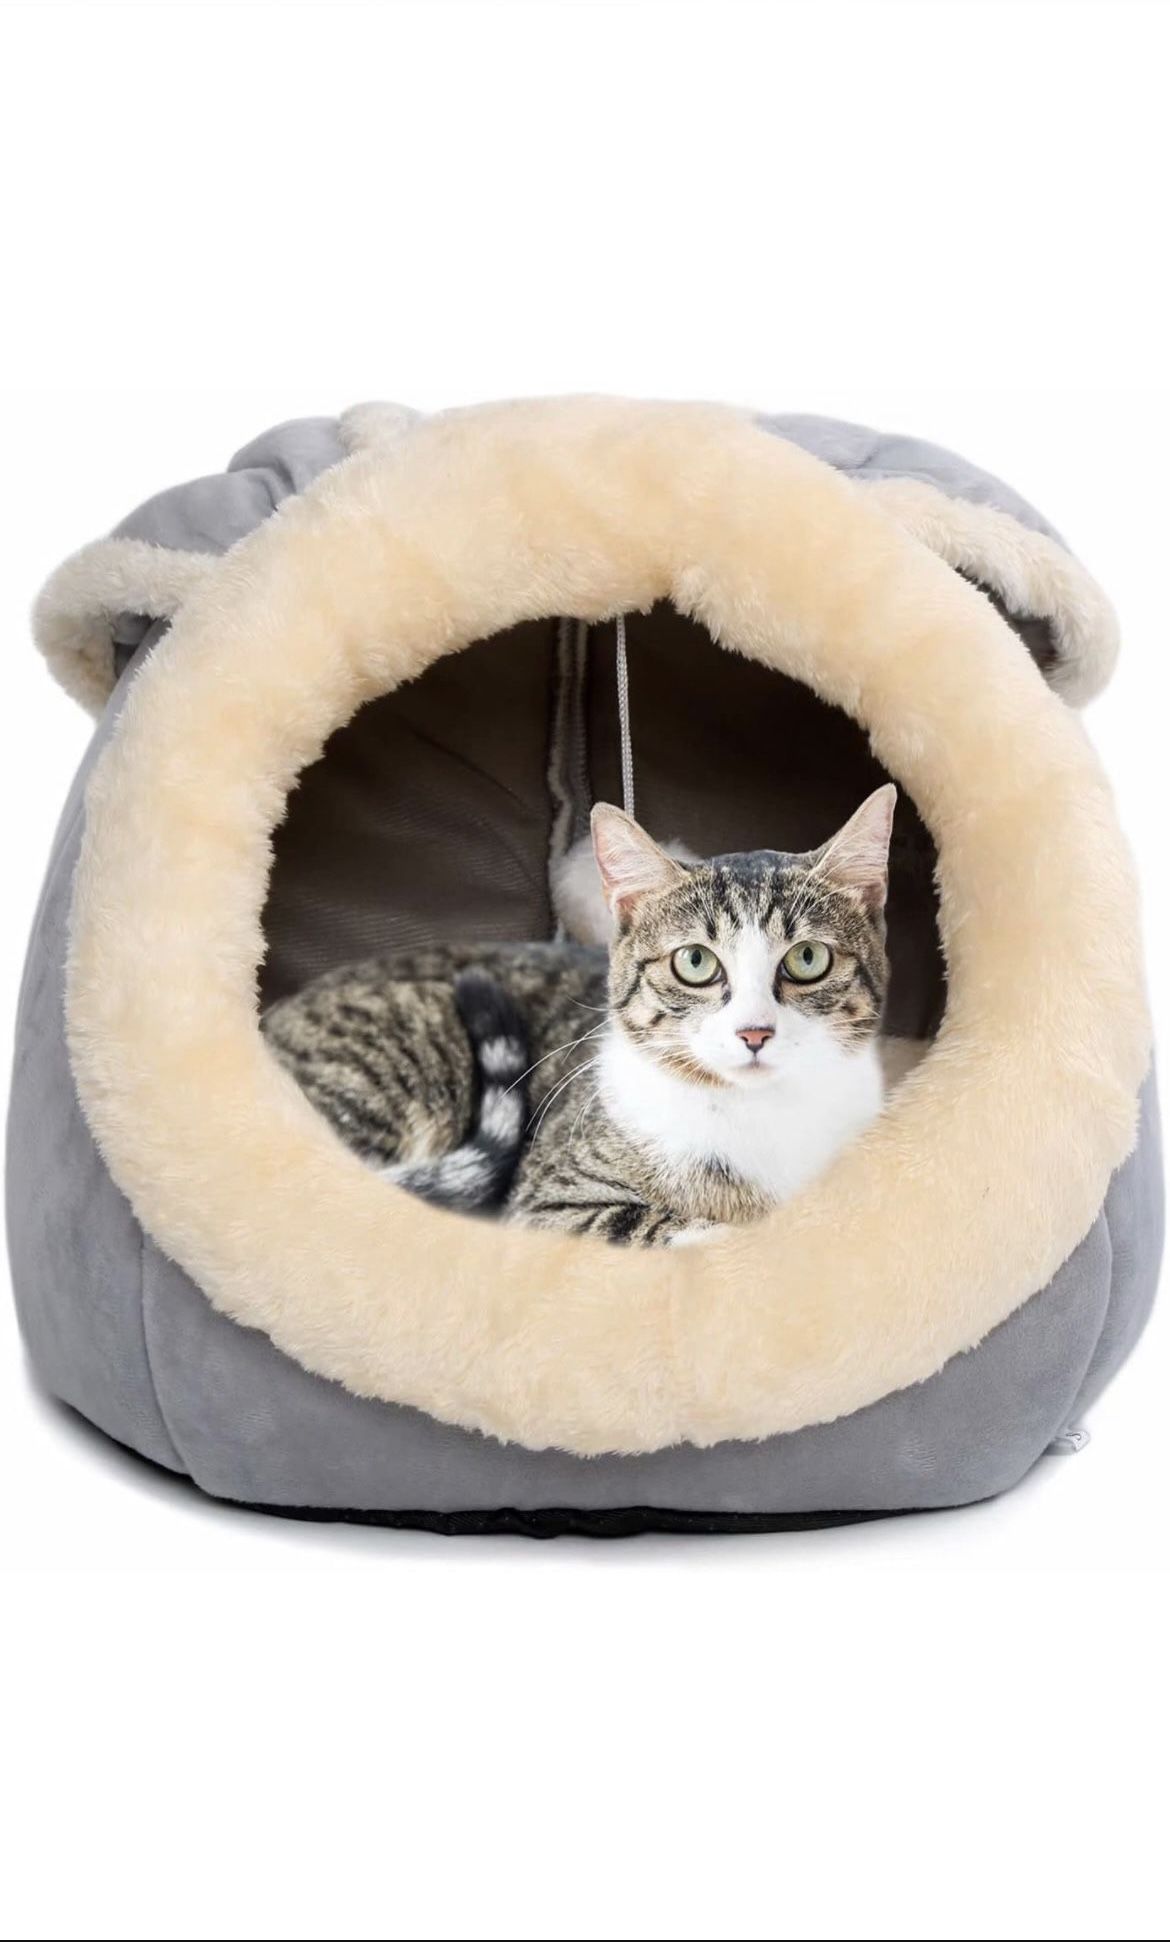 Beds for Indoor Cats - with Anti-Slip Bottom, Rabbit-Shaped Dog Cave with Hanging Toy, Puppy Bed with Removable Cotton Pad